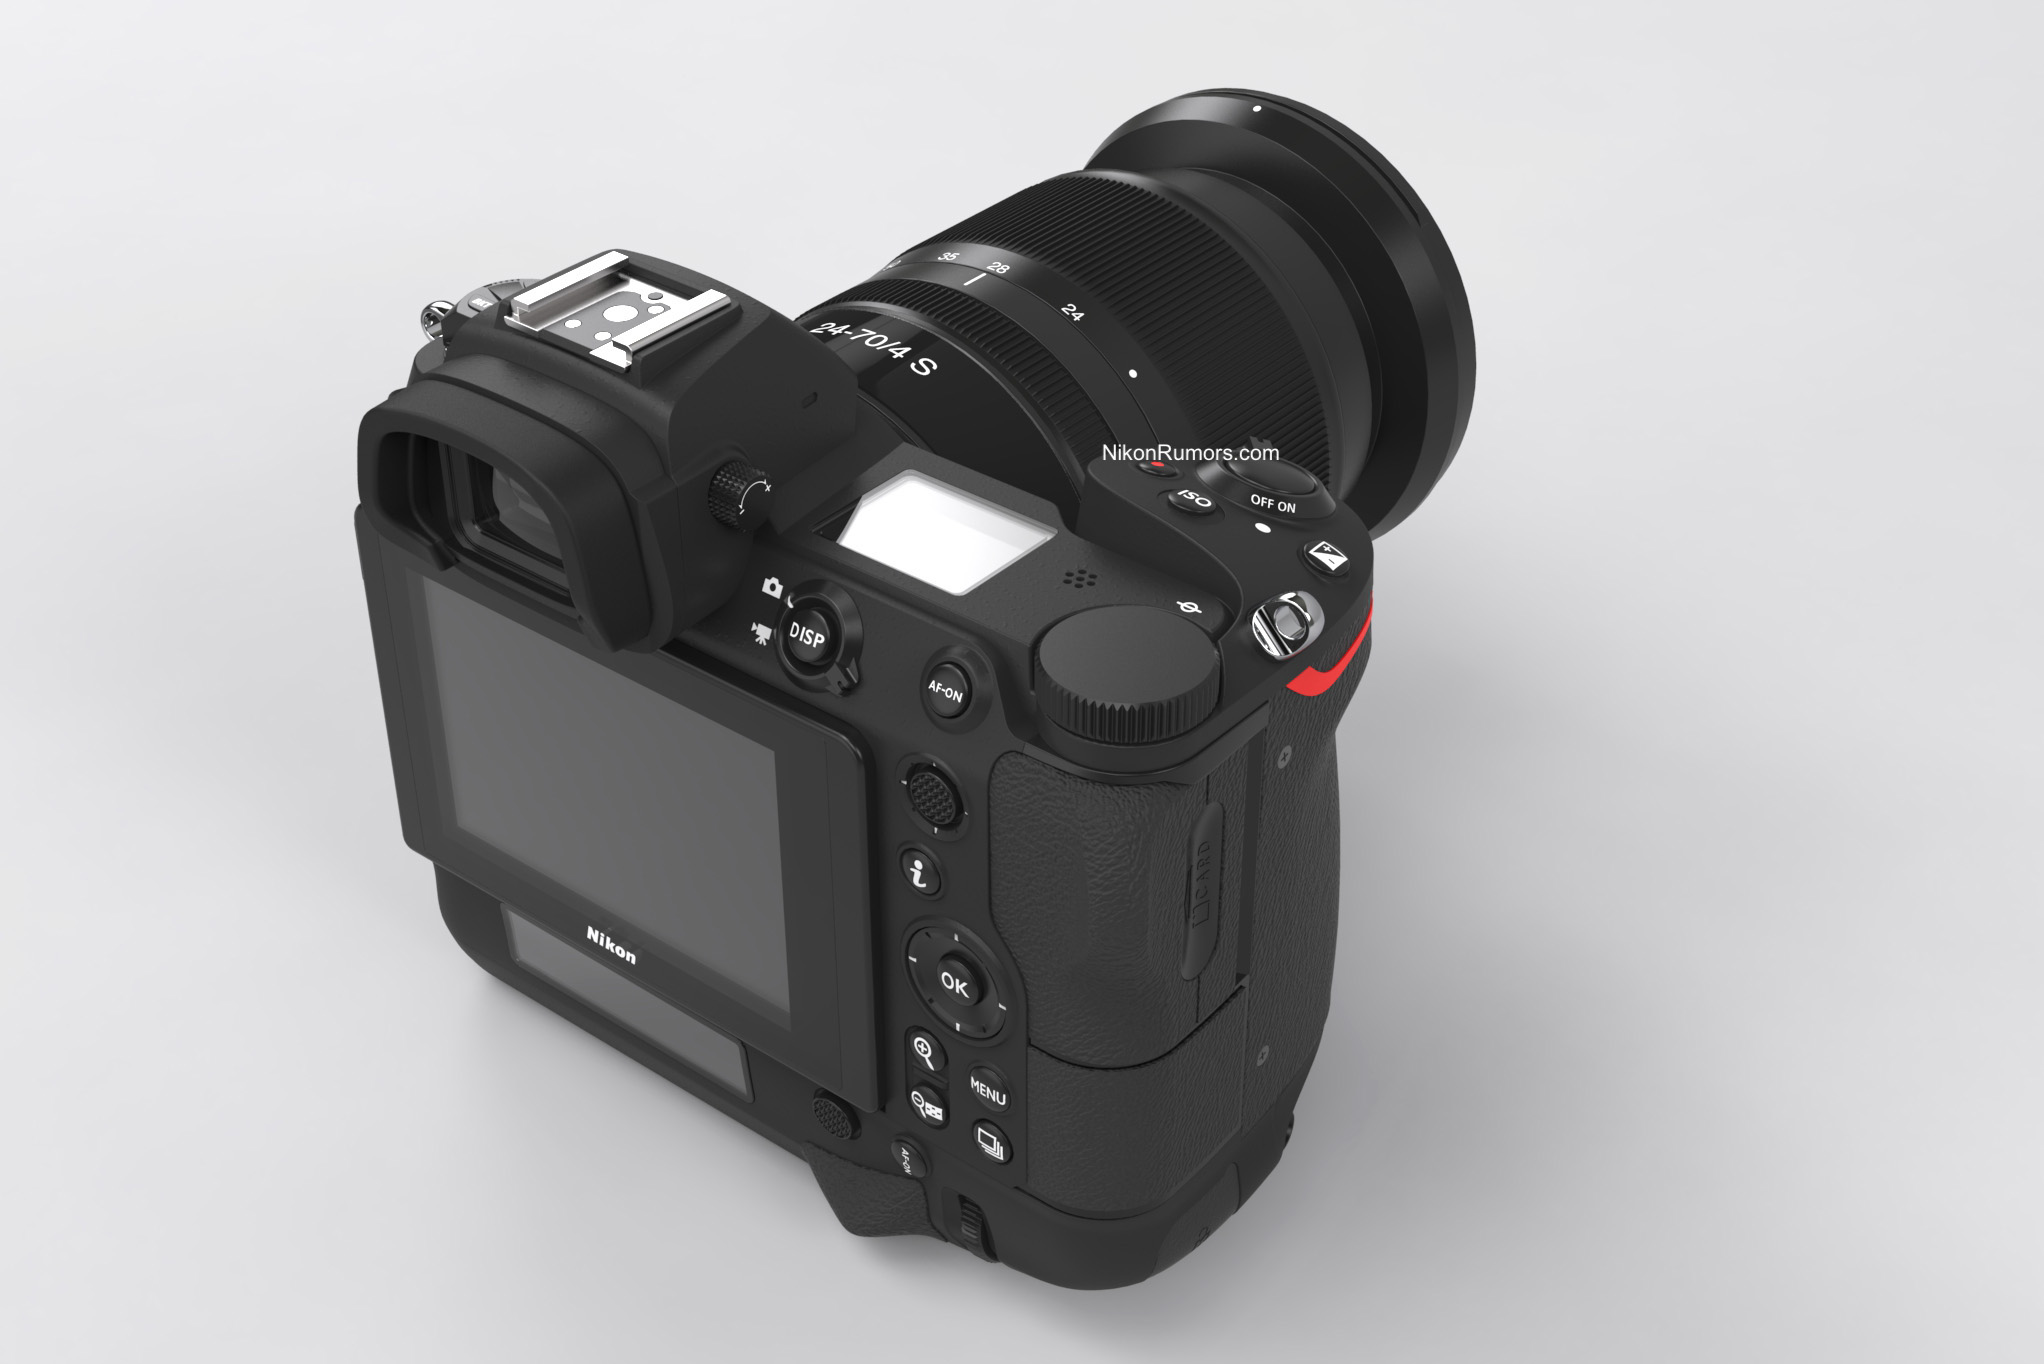 Nikon Z9 professional mirrorless camera development announcement coming  tonight (incl. rumored specifications) - Photo Rumors